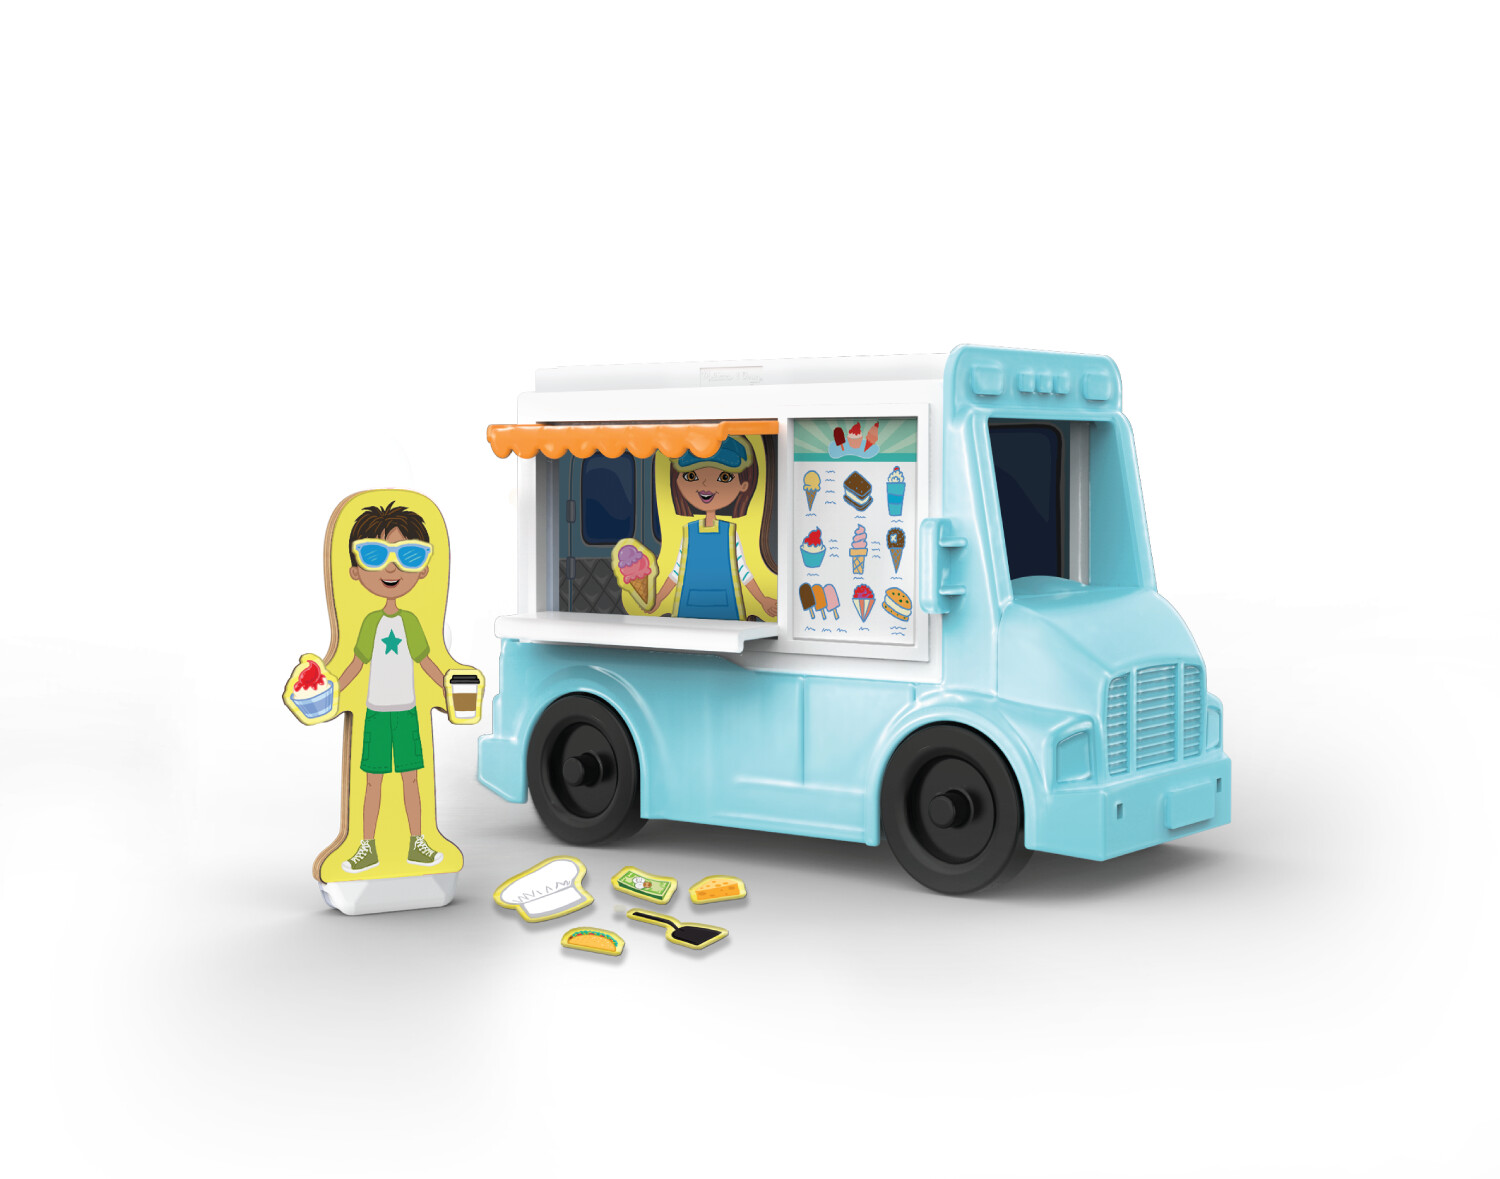 Food Truck Set. The set includes extra magnets and panels to convert the ice cream truck to a burger truck or taco truck. The plastic truck piece was also used in the Hospital, School, Farm, Restaurant and Safari Truck sets.